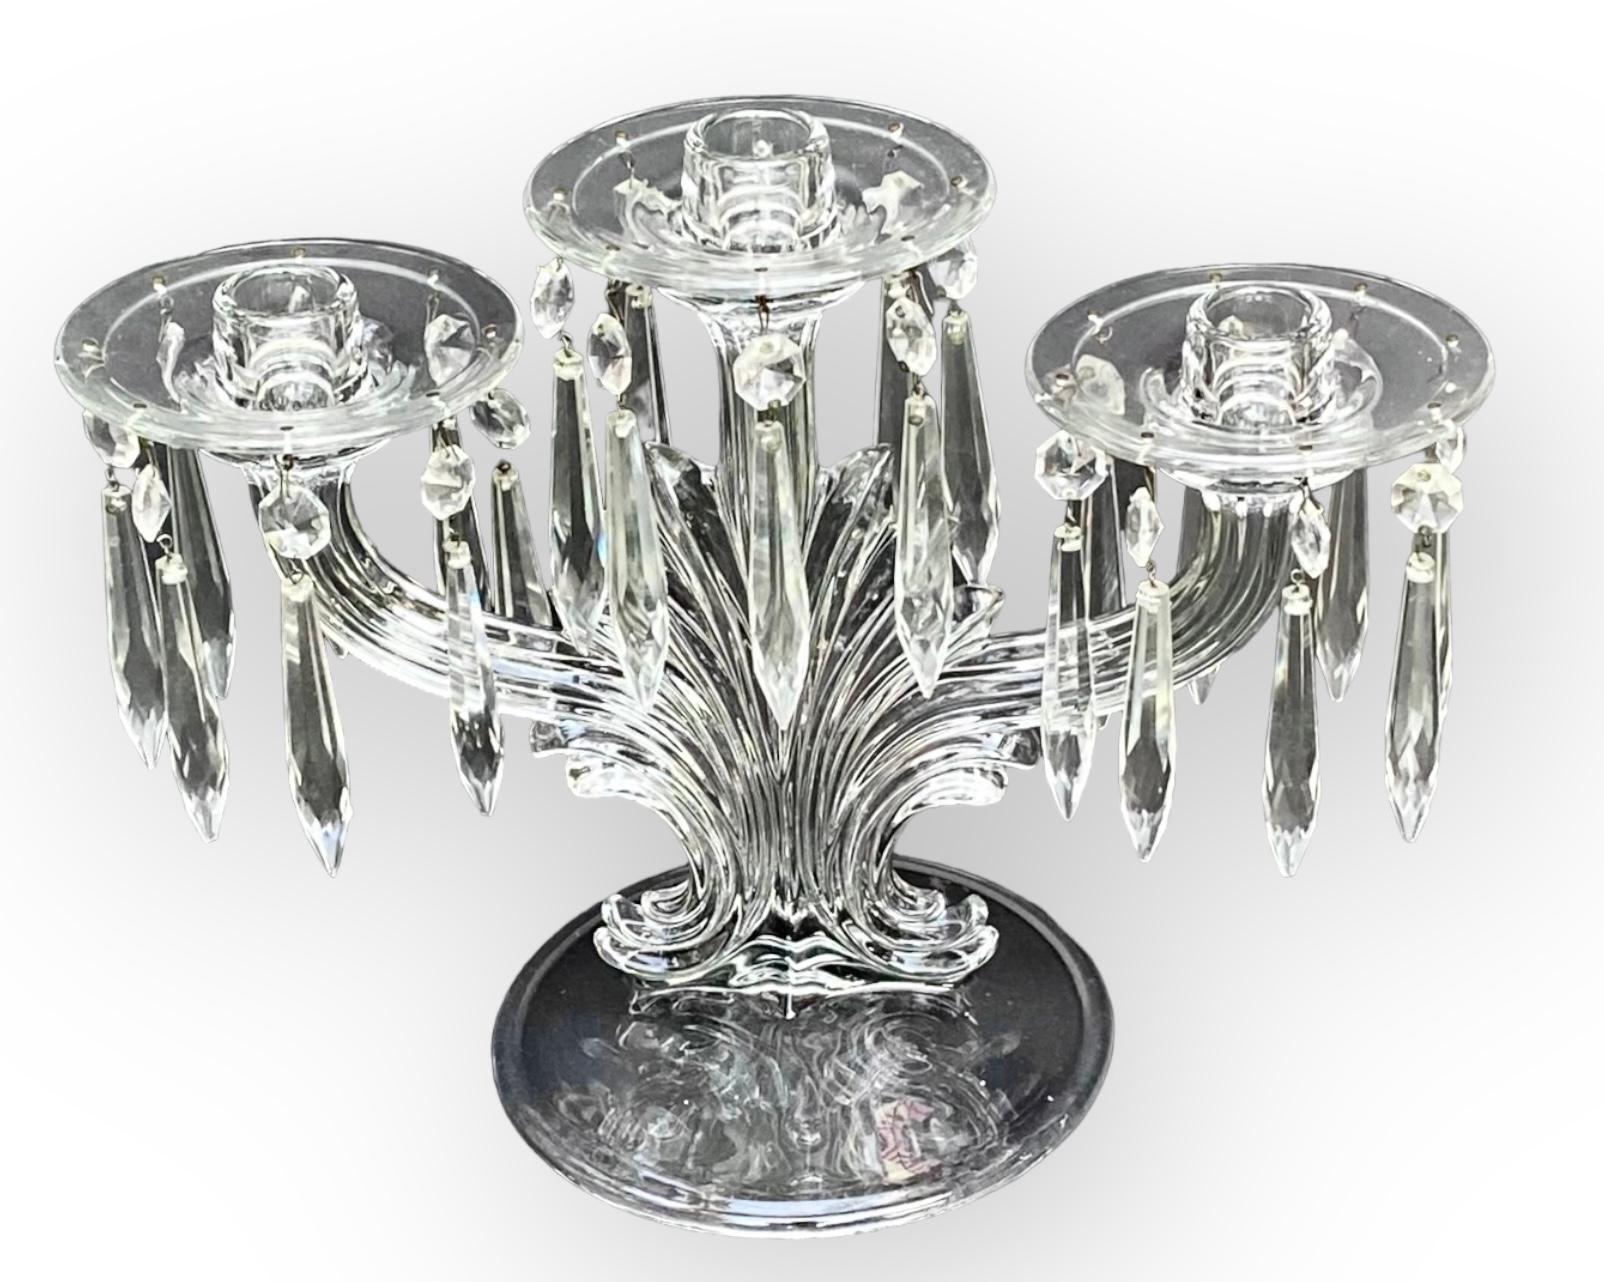 Pair of American Pressed Glass Three Light Candelabra, Early 20th C., on Swirled For Sale 3